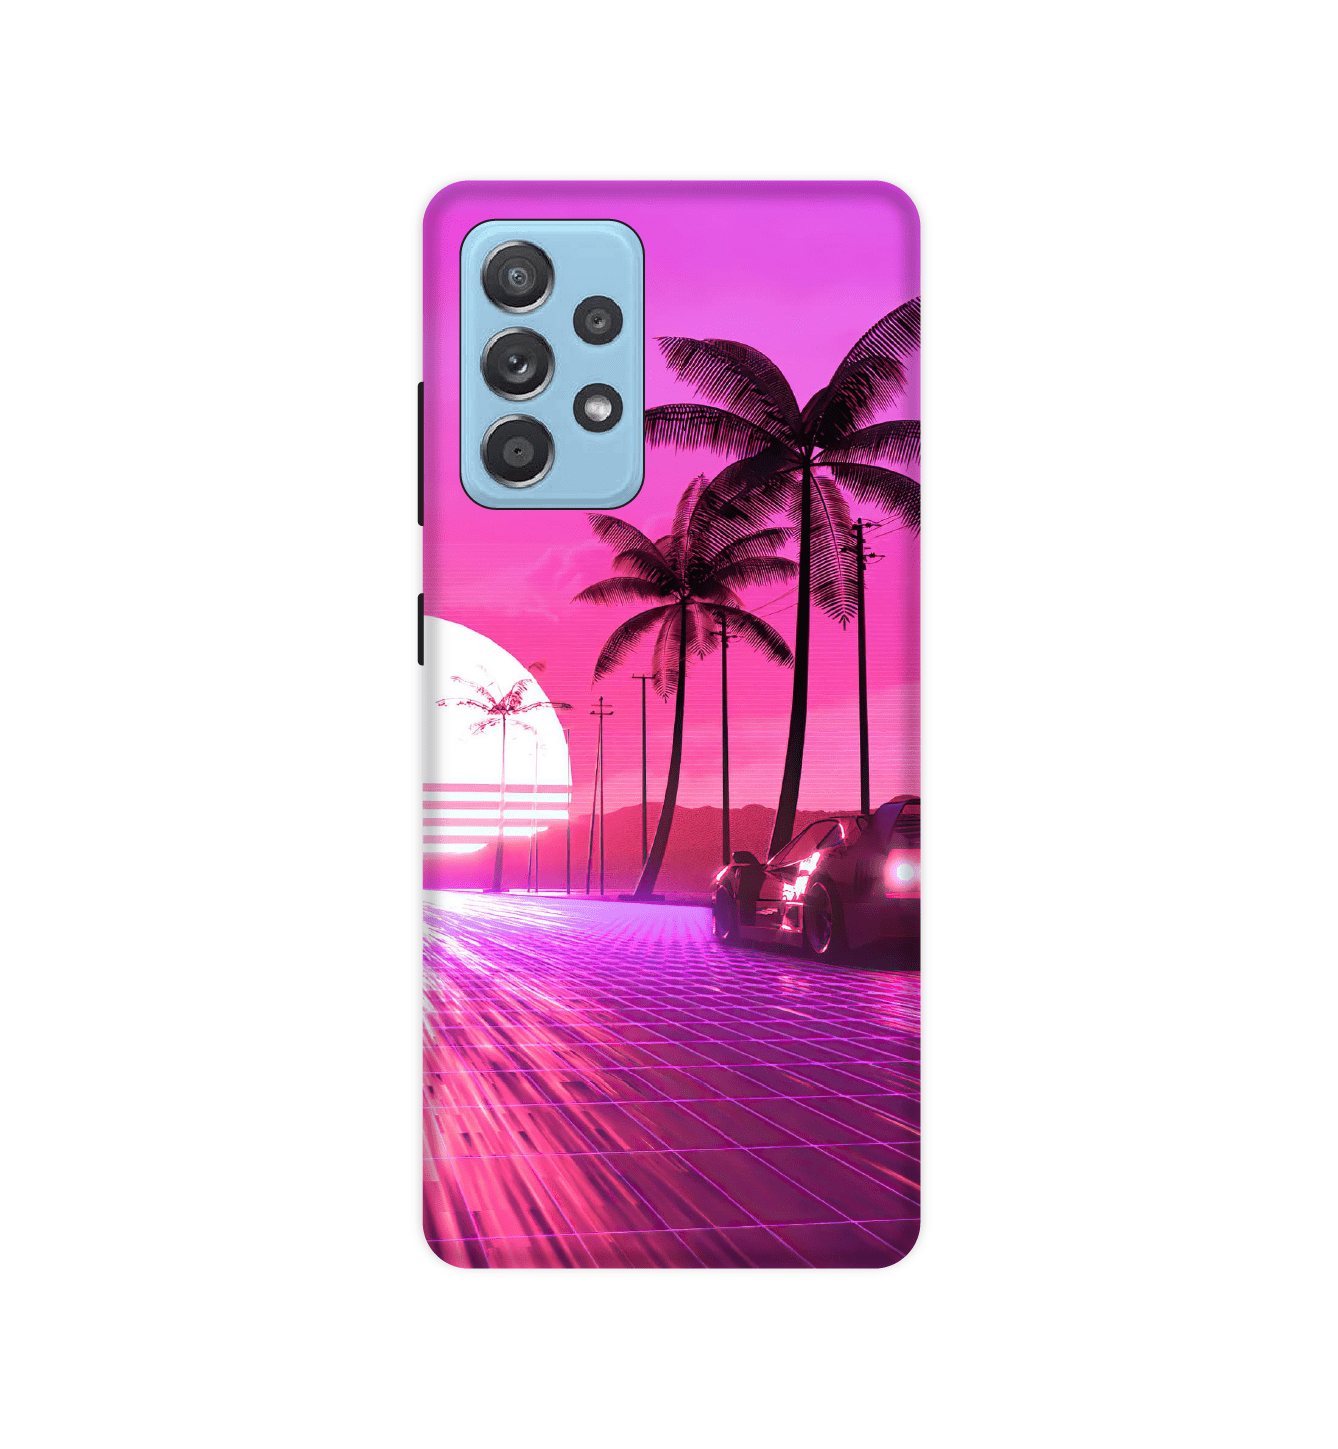 Retro Beach Synthwave - Hard Case For Samsung Models